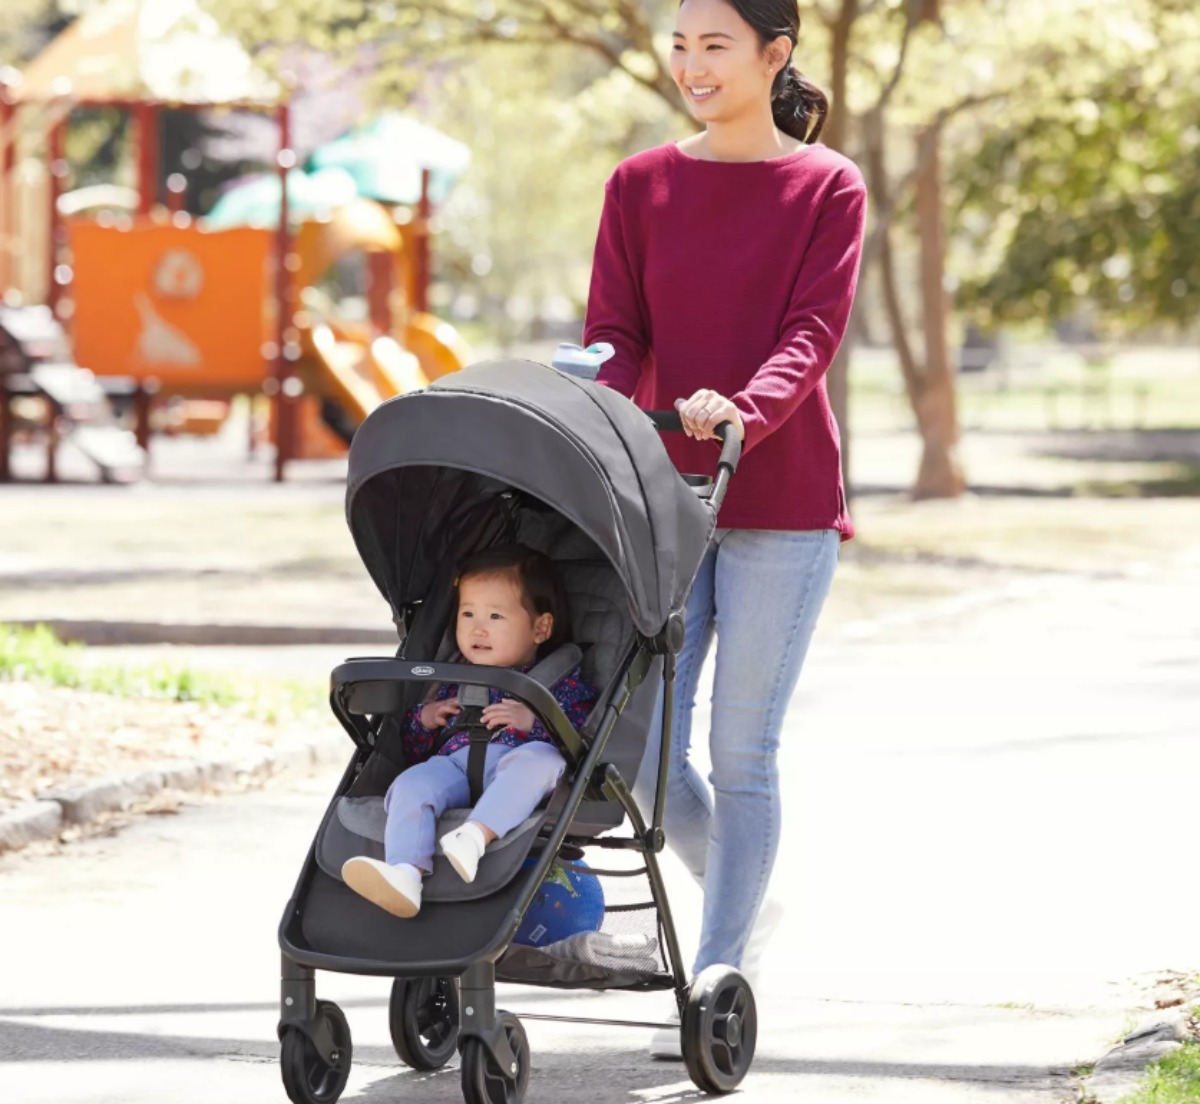 when can baby sit in graco stroller without car seat